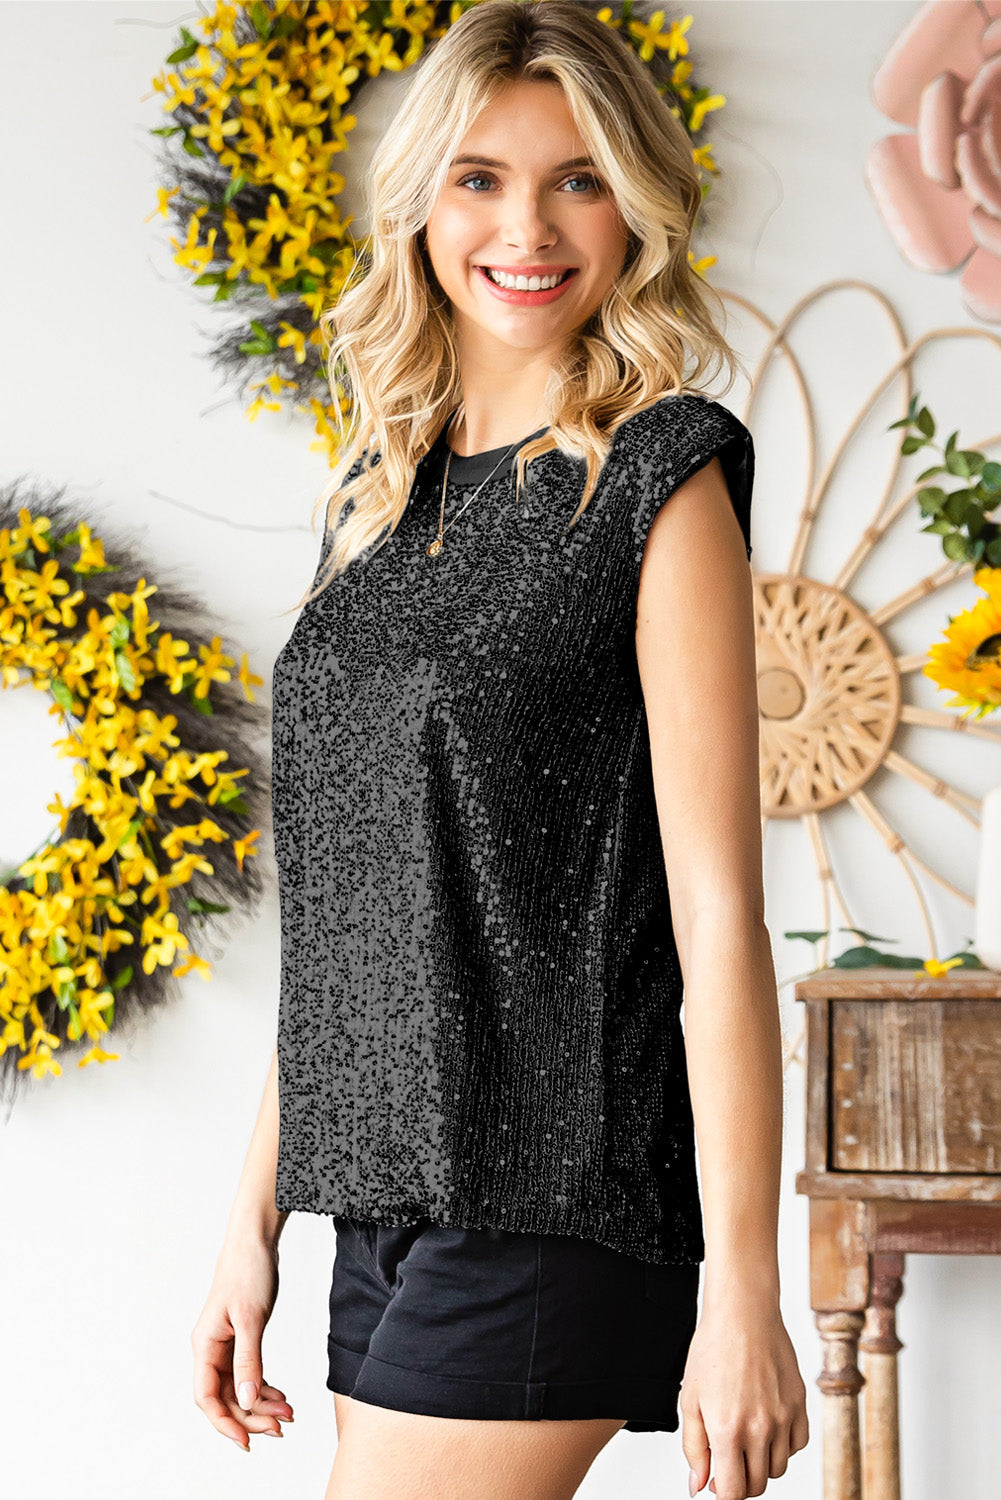 Summer Shani Sequin Capped Sleeve Tank - 3 Colors